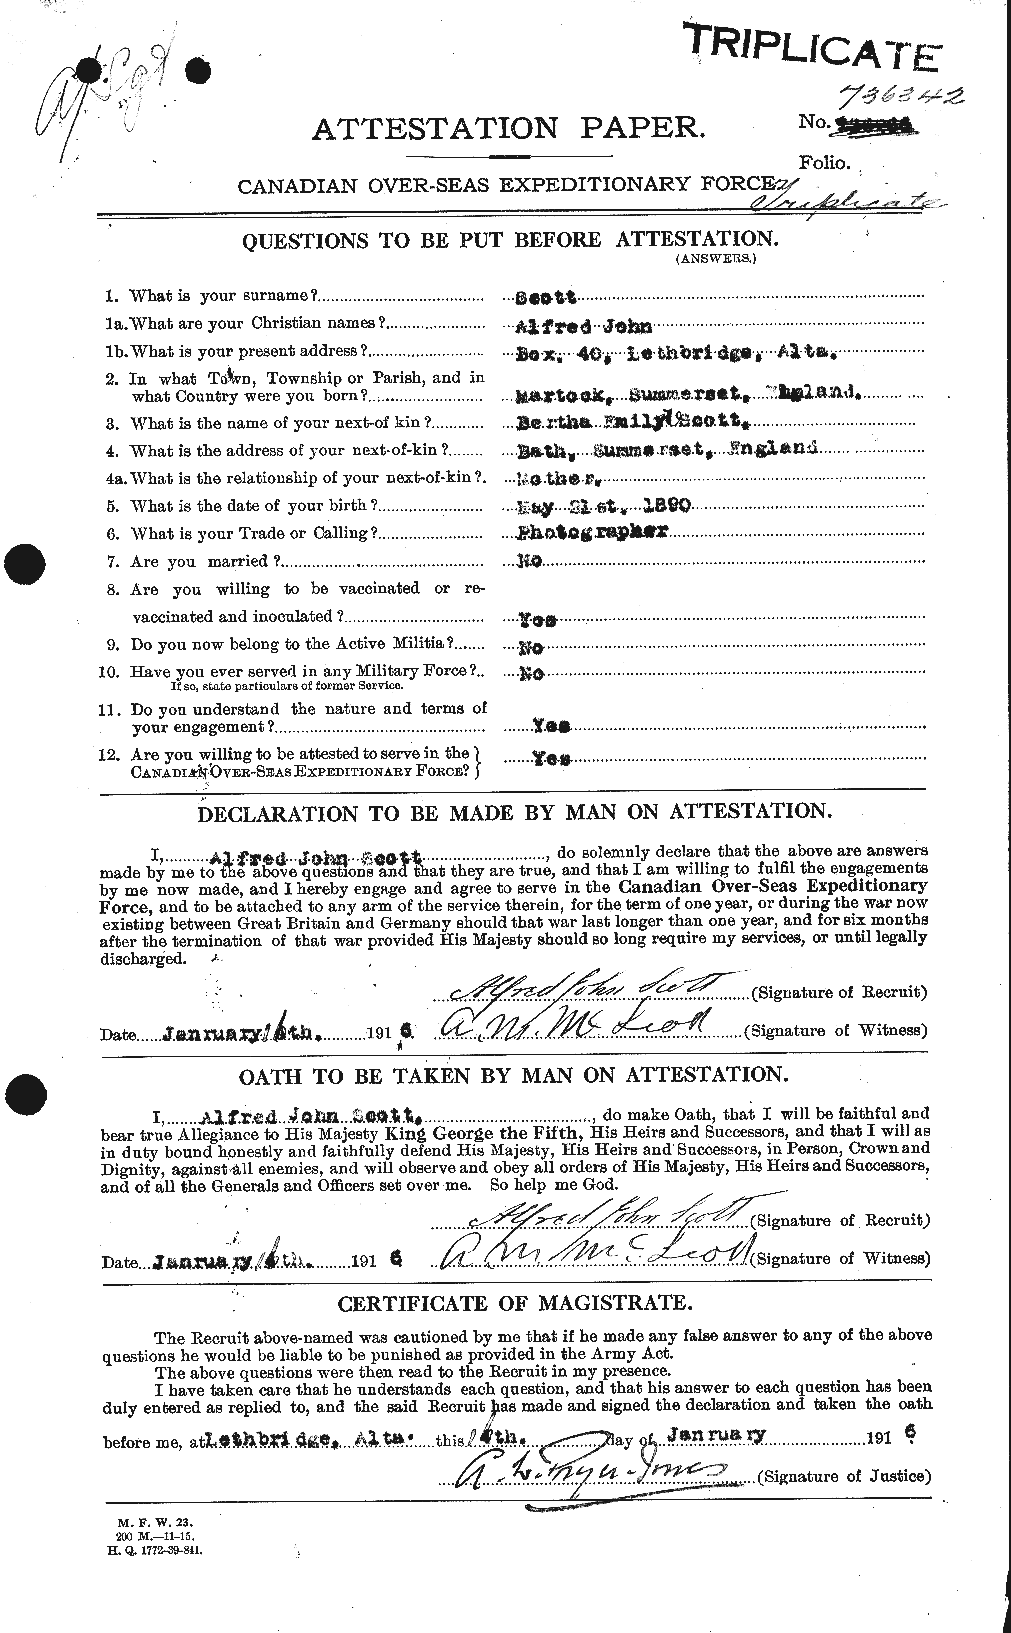 Personnel Records of the First World War - CEF 086580a